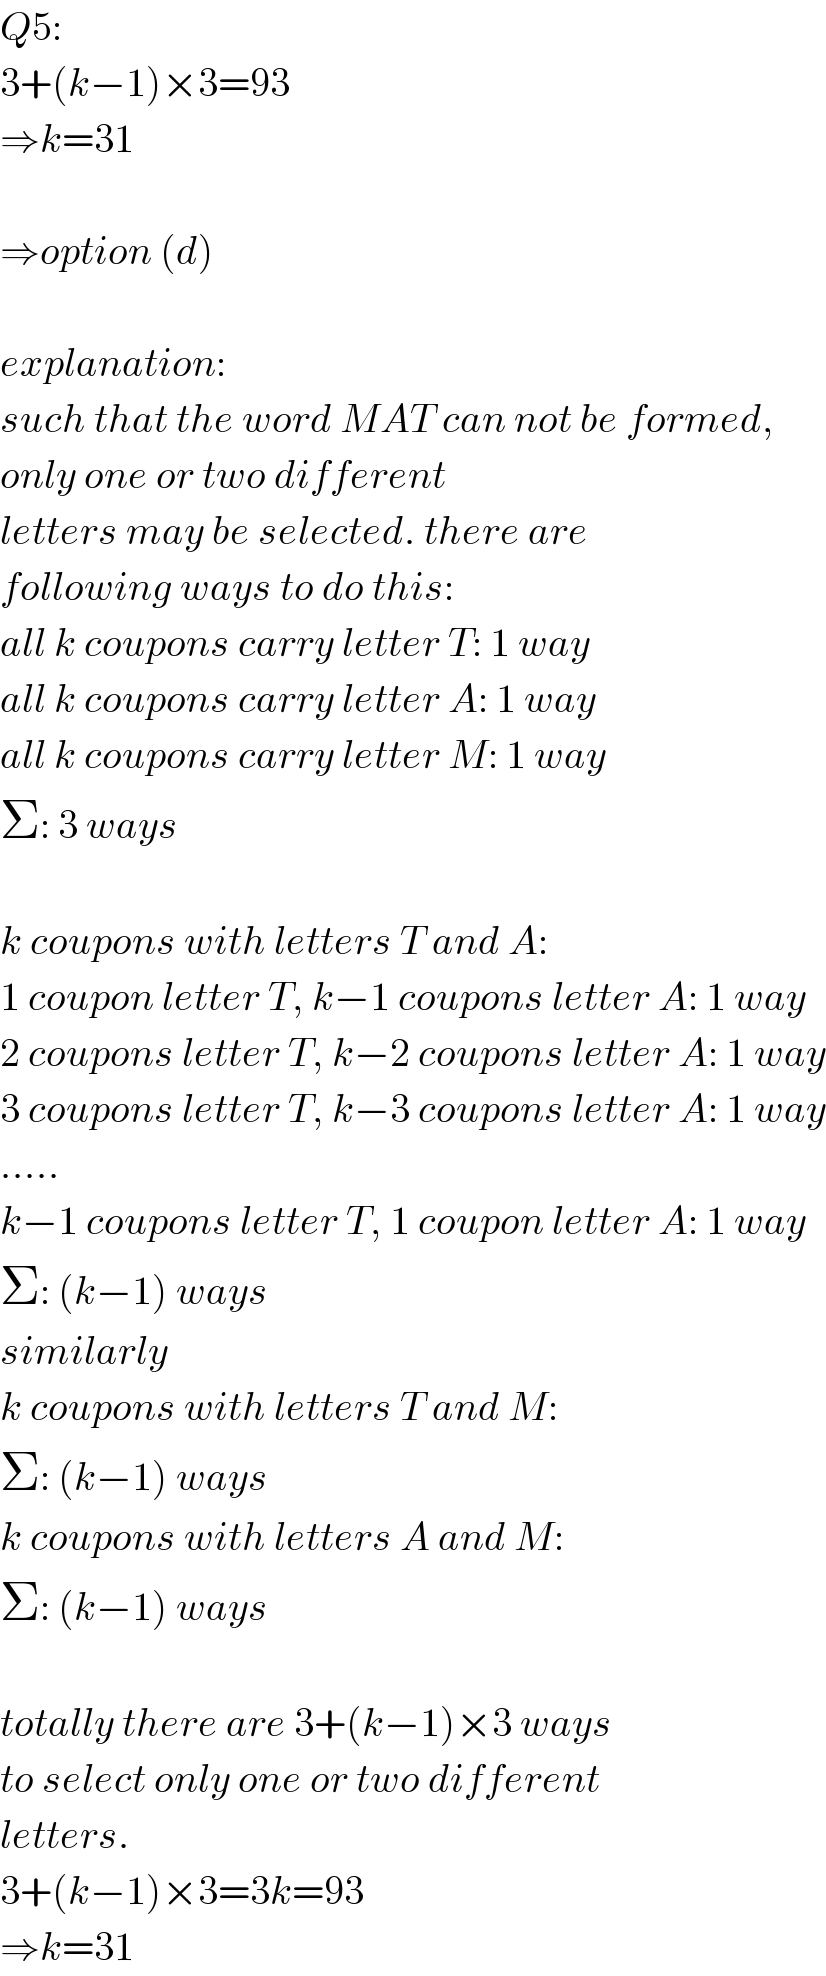 Q5:  3+(k−1)×3=93  ⇒k=31    ⇒option (d)    explanation:  such that the word MAT can not be formed,  only one or two different  letters may be selected. there are  following ways to do this:  all k coupons carry letter T: 1 way  all k coupons carry letter A: 1 way  all k coupons carry letter M: 1 way  Σ: 3 ways    k coupons with letters T and A:  1 coupon letter T, k−1 coupons letter A: 1 way  2 coupons letter T, k−2 coupons letter A: 1 way  3 coupons letter T, k−3 coupons letter A: 1 way  .....  k−1 coupons letter T, 1 coupon letter A: 1 way  Σ: (k−1) ways  similarly  k coupons with letters T and M:  Σ: (k−1) ways  k coupons with letters A and M:  Σ: (k−1) ways    totally there are 3+(k−1)×3 ways  to select only one or two different  letters.  3+(k−1)×3=3k=93  ⇒k=31  